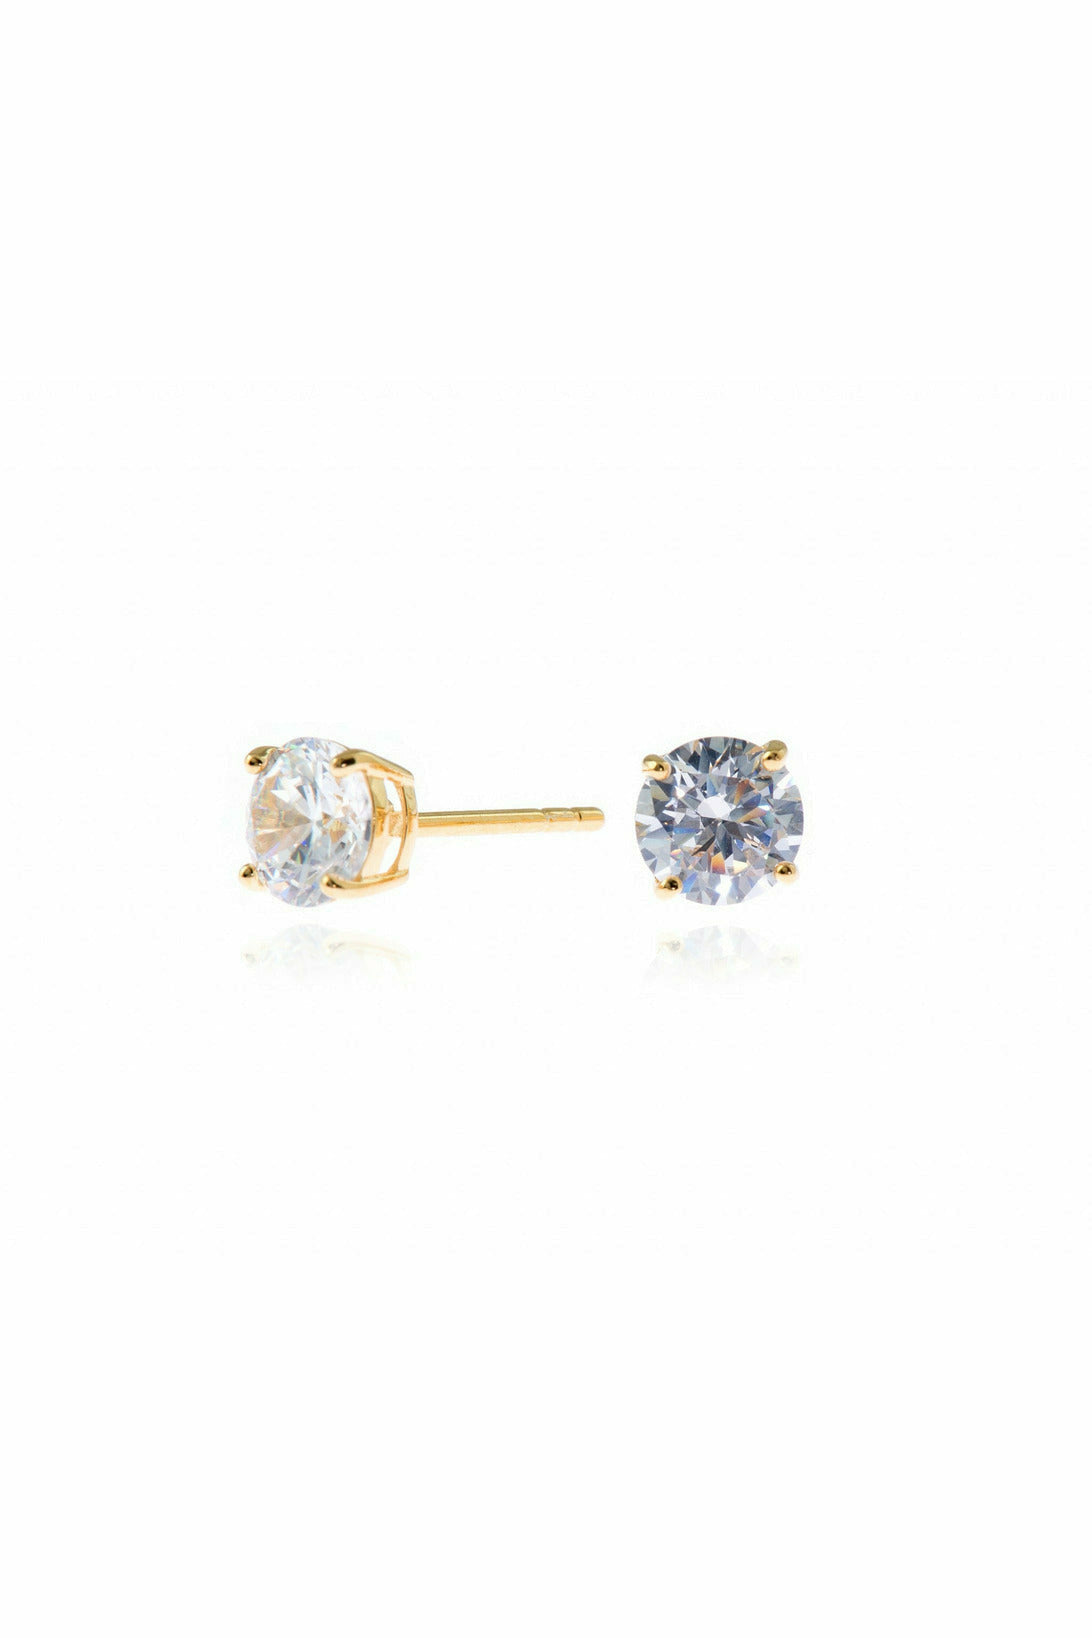 Lana 6mm-Sterling Silver, 18ct Gold ,Clear CZ Cachet London